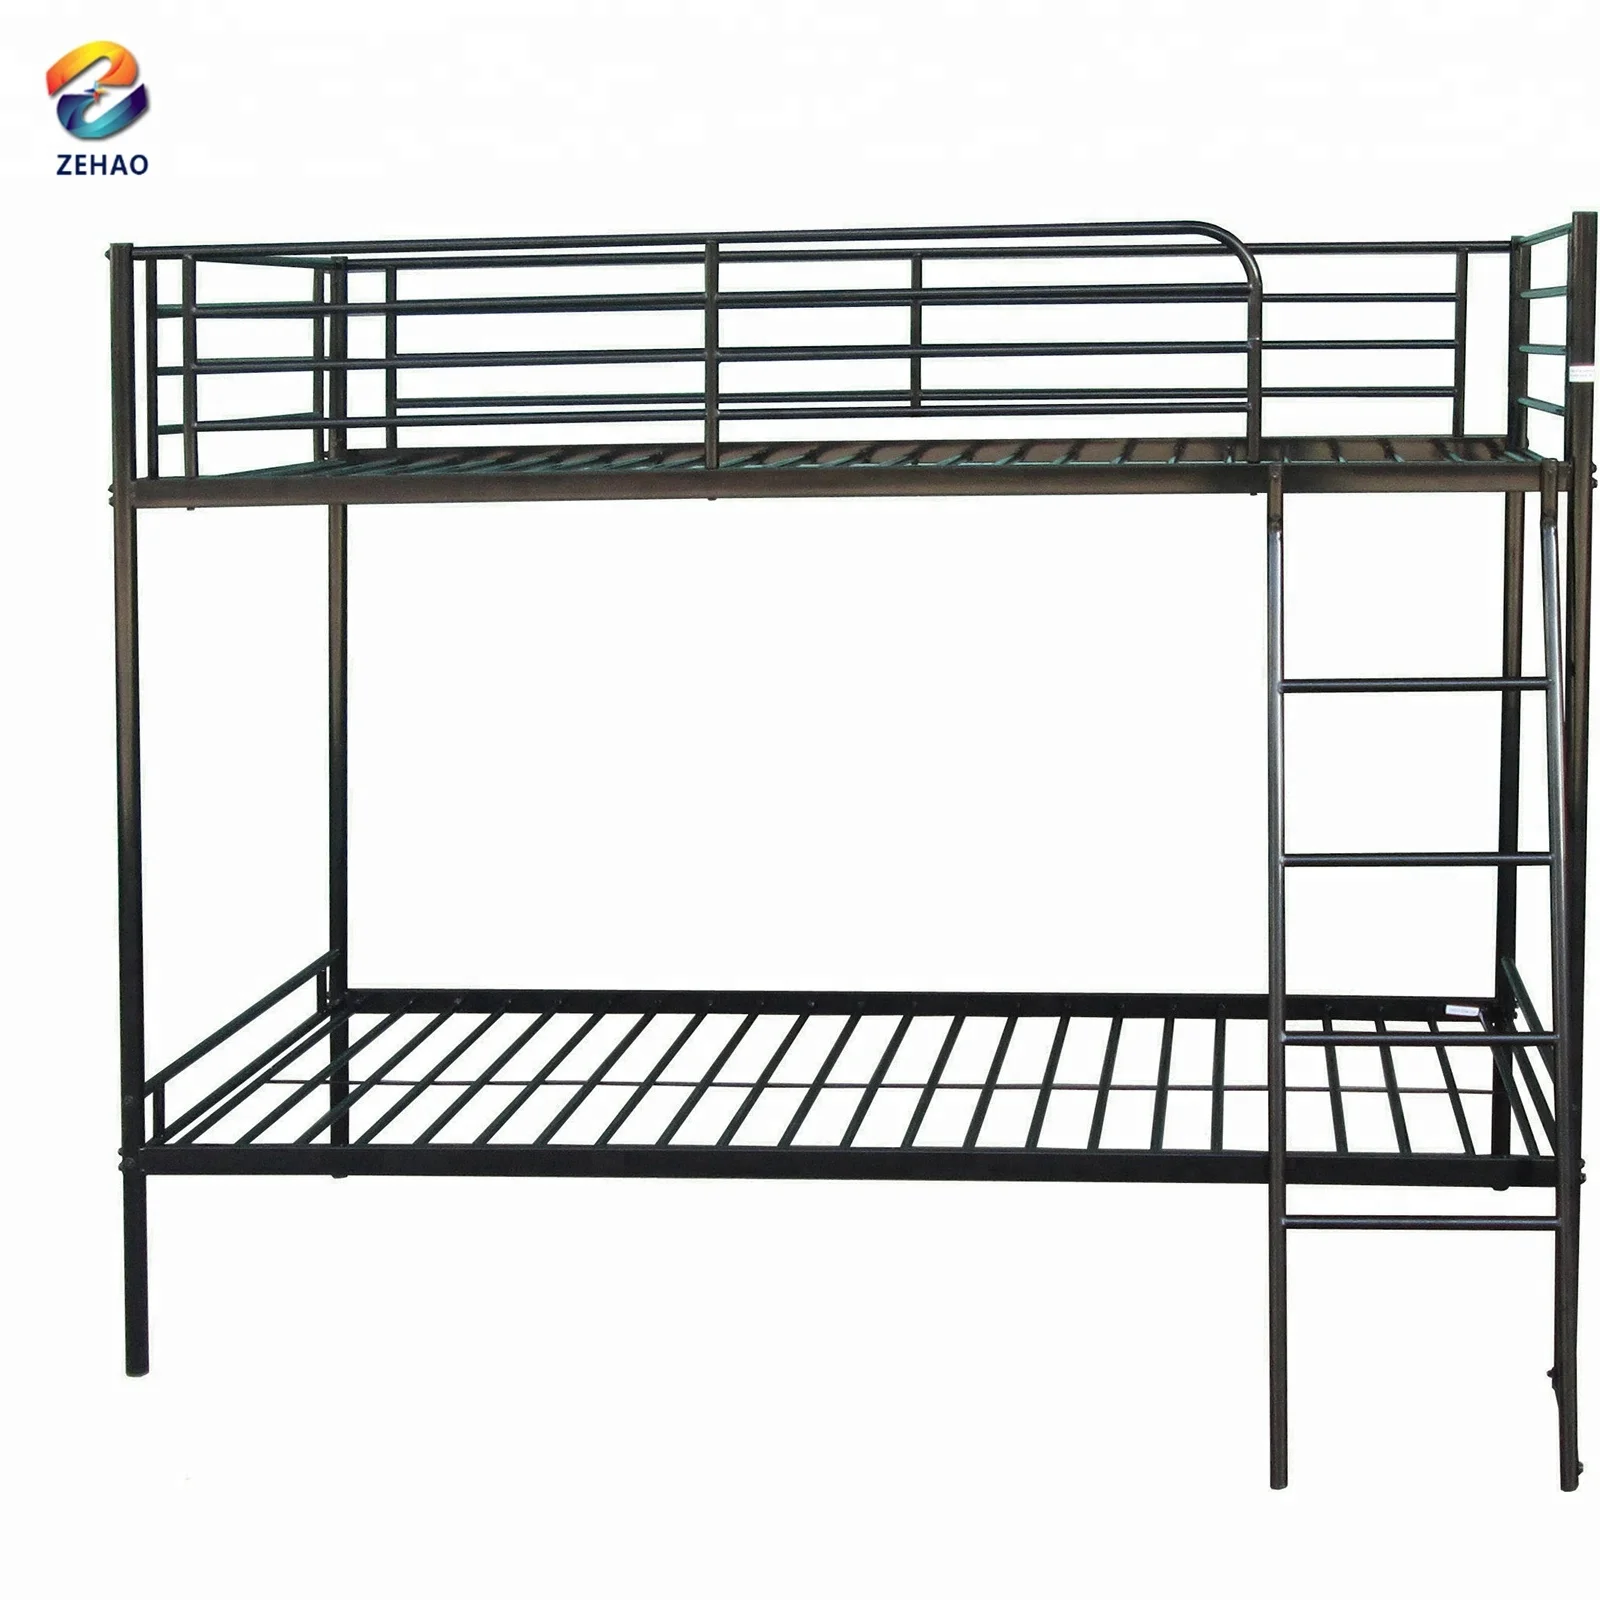 
2018 Hot Sell Dormitory Student Metal bunk bed hostel bed 